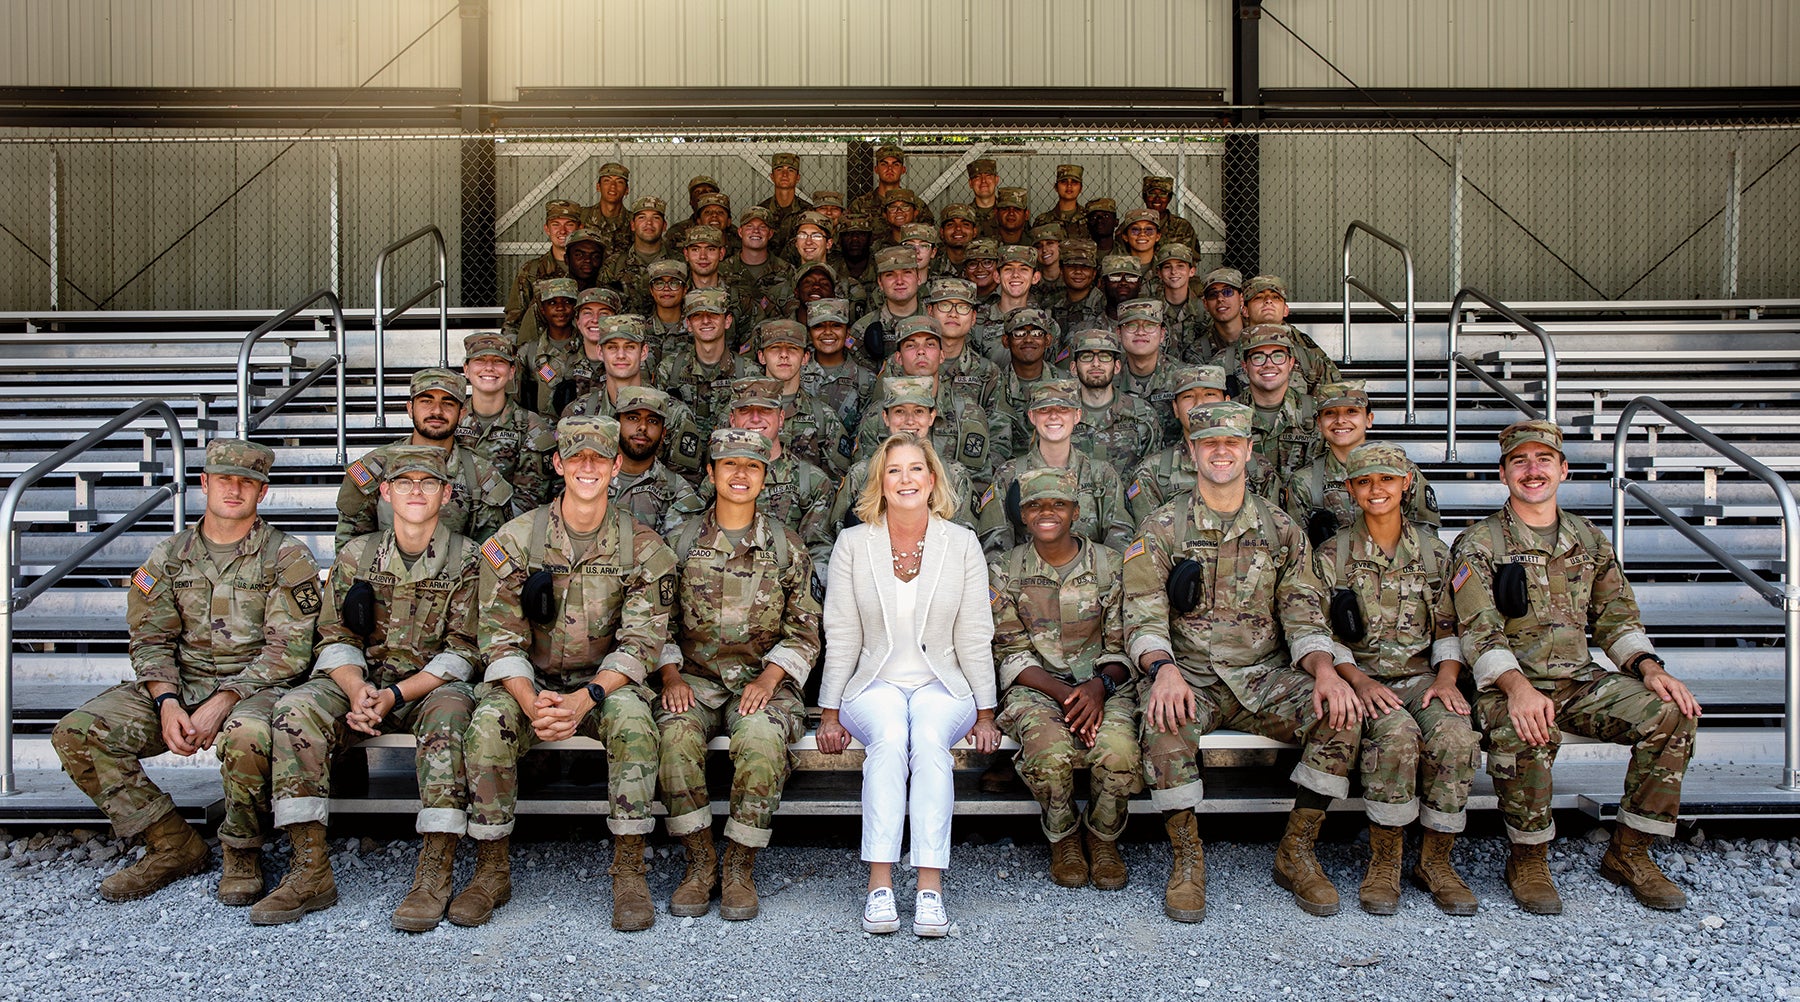 Army Secretary Christine Wormuth poses for a photo with cadets attending Cadet Summer Training during a visit to Fort Knox, Kentucky. (Credit: U.S. Army)